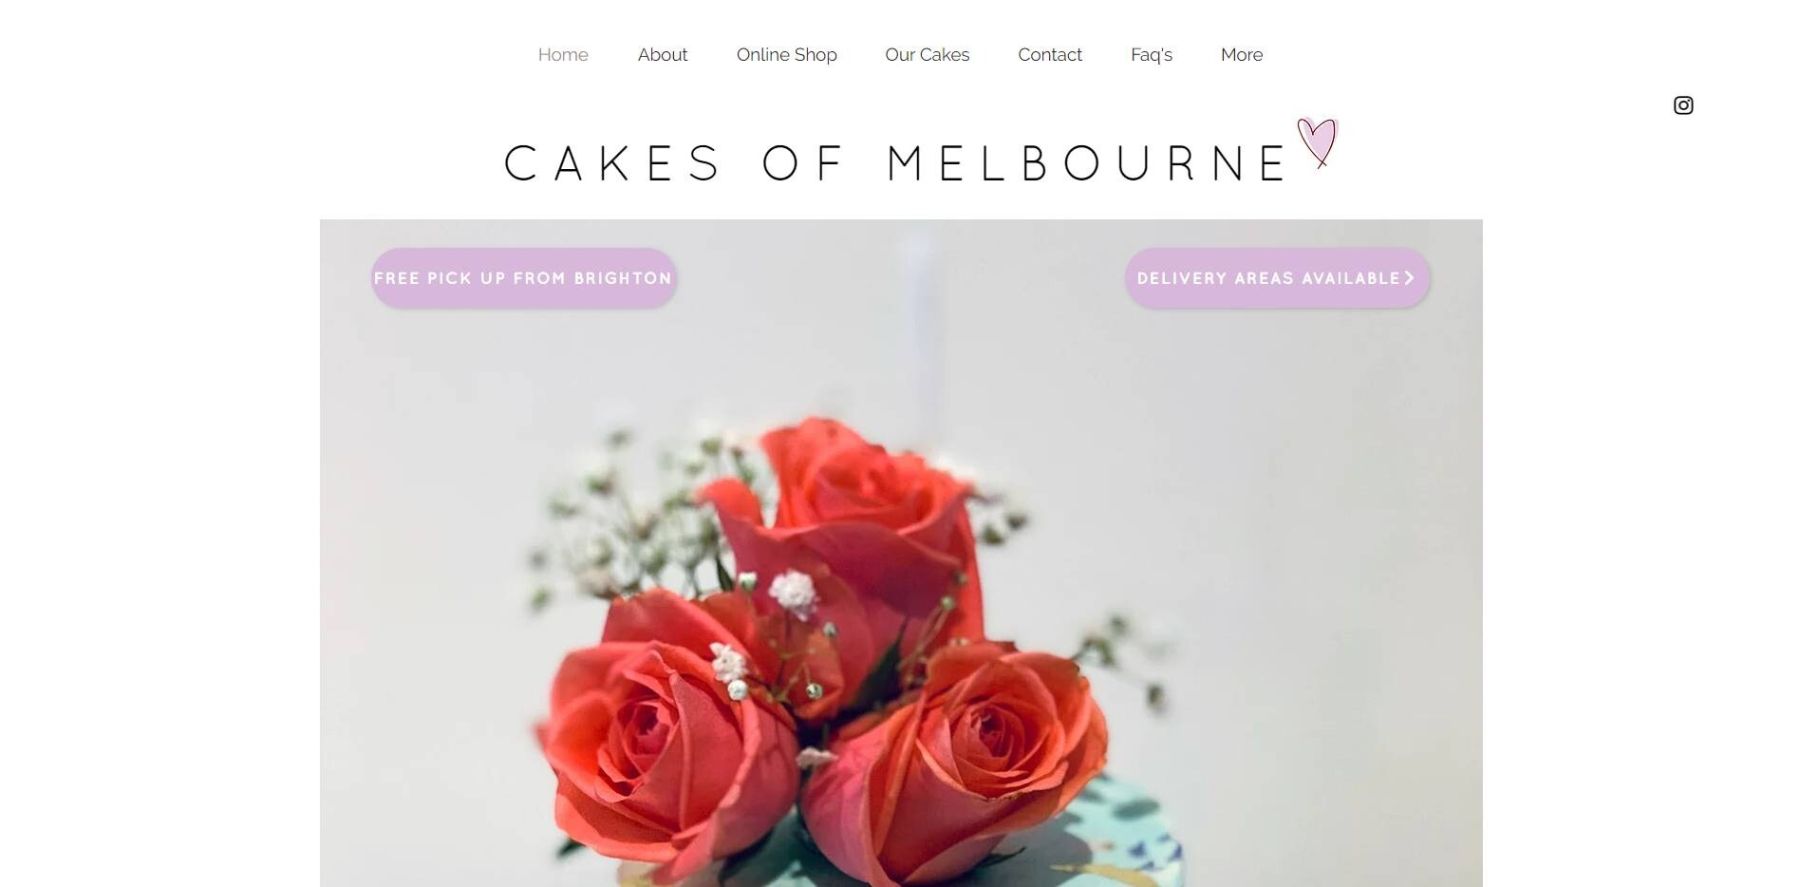 Top 50 Wedding Cake Ideas & Shops in Melbourne [2021]  by Wild Romantic Photography Melbourne